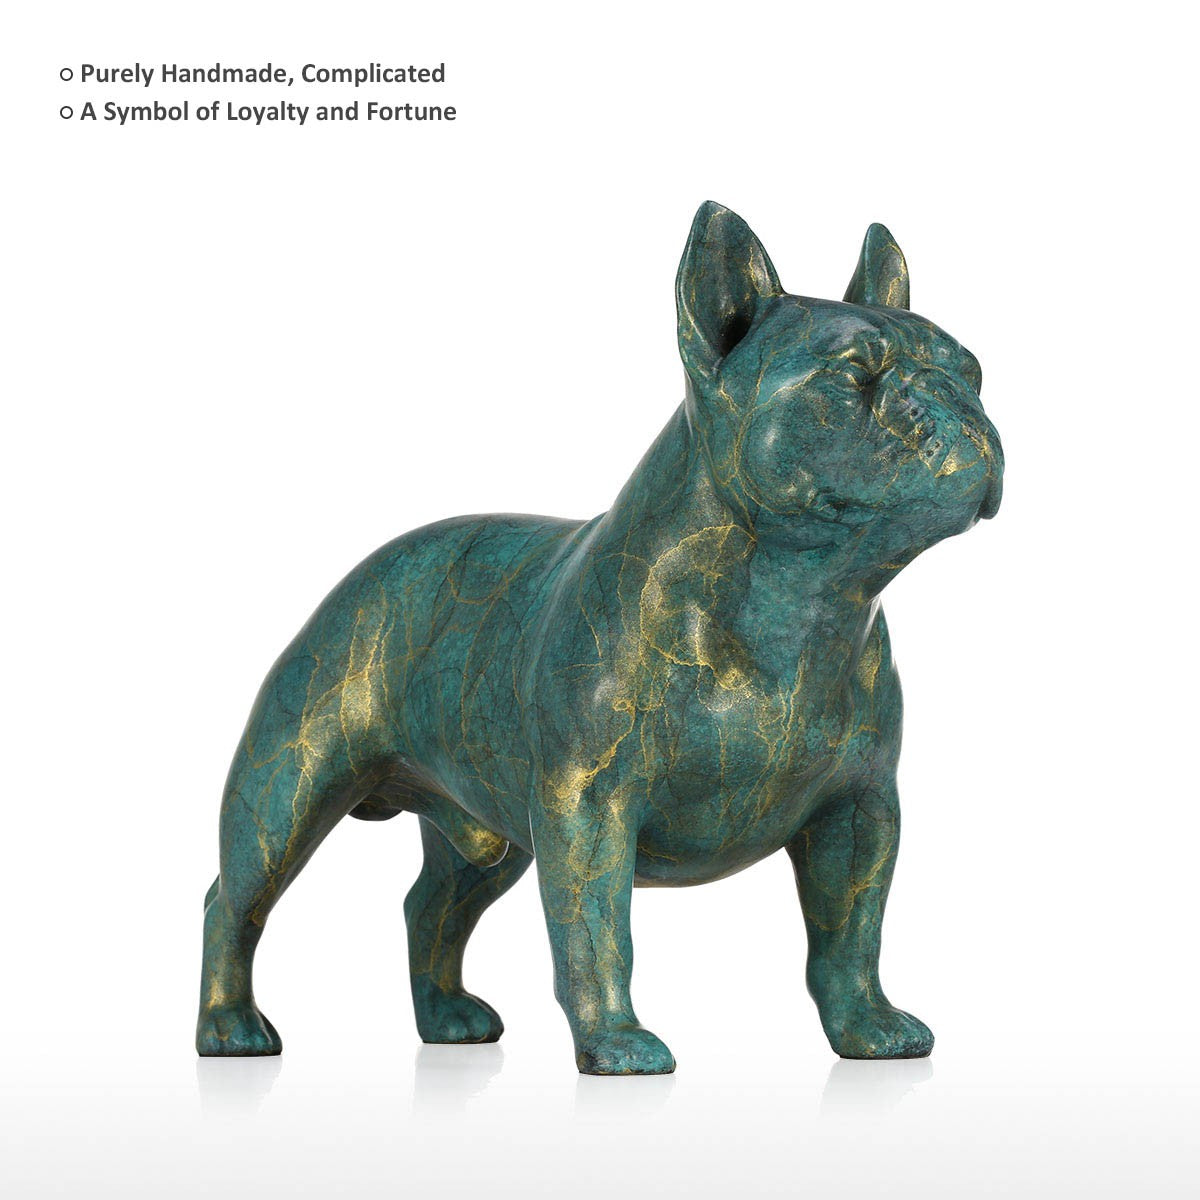 Luxury Christmas Gifts or Luxury Christmas Decorations  with French Bulldog Statue for Christmas Decorations